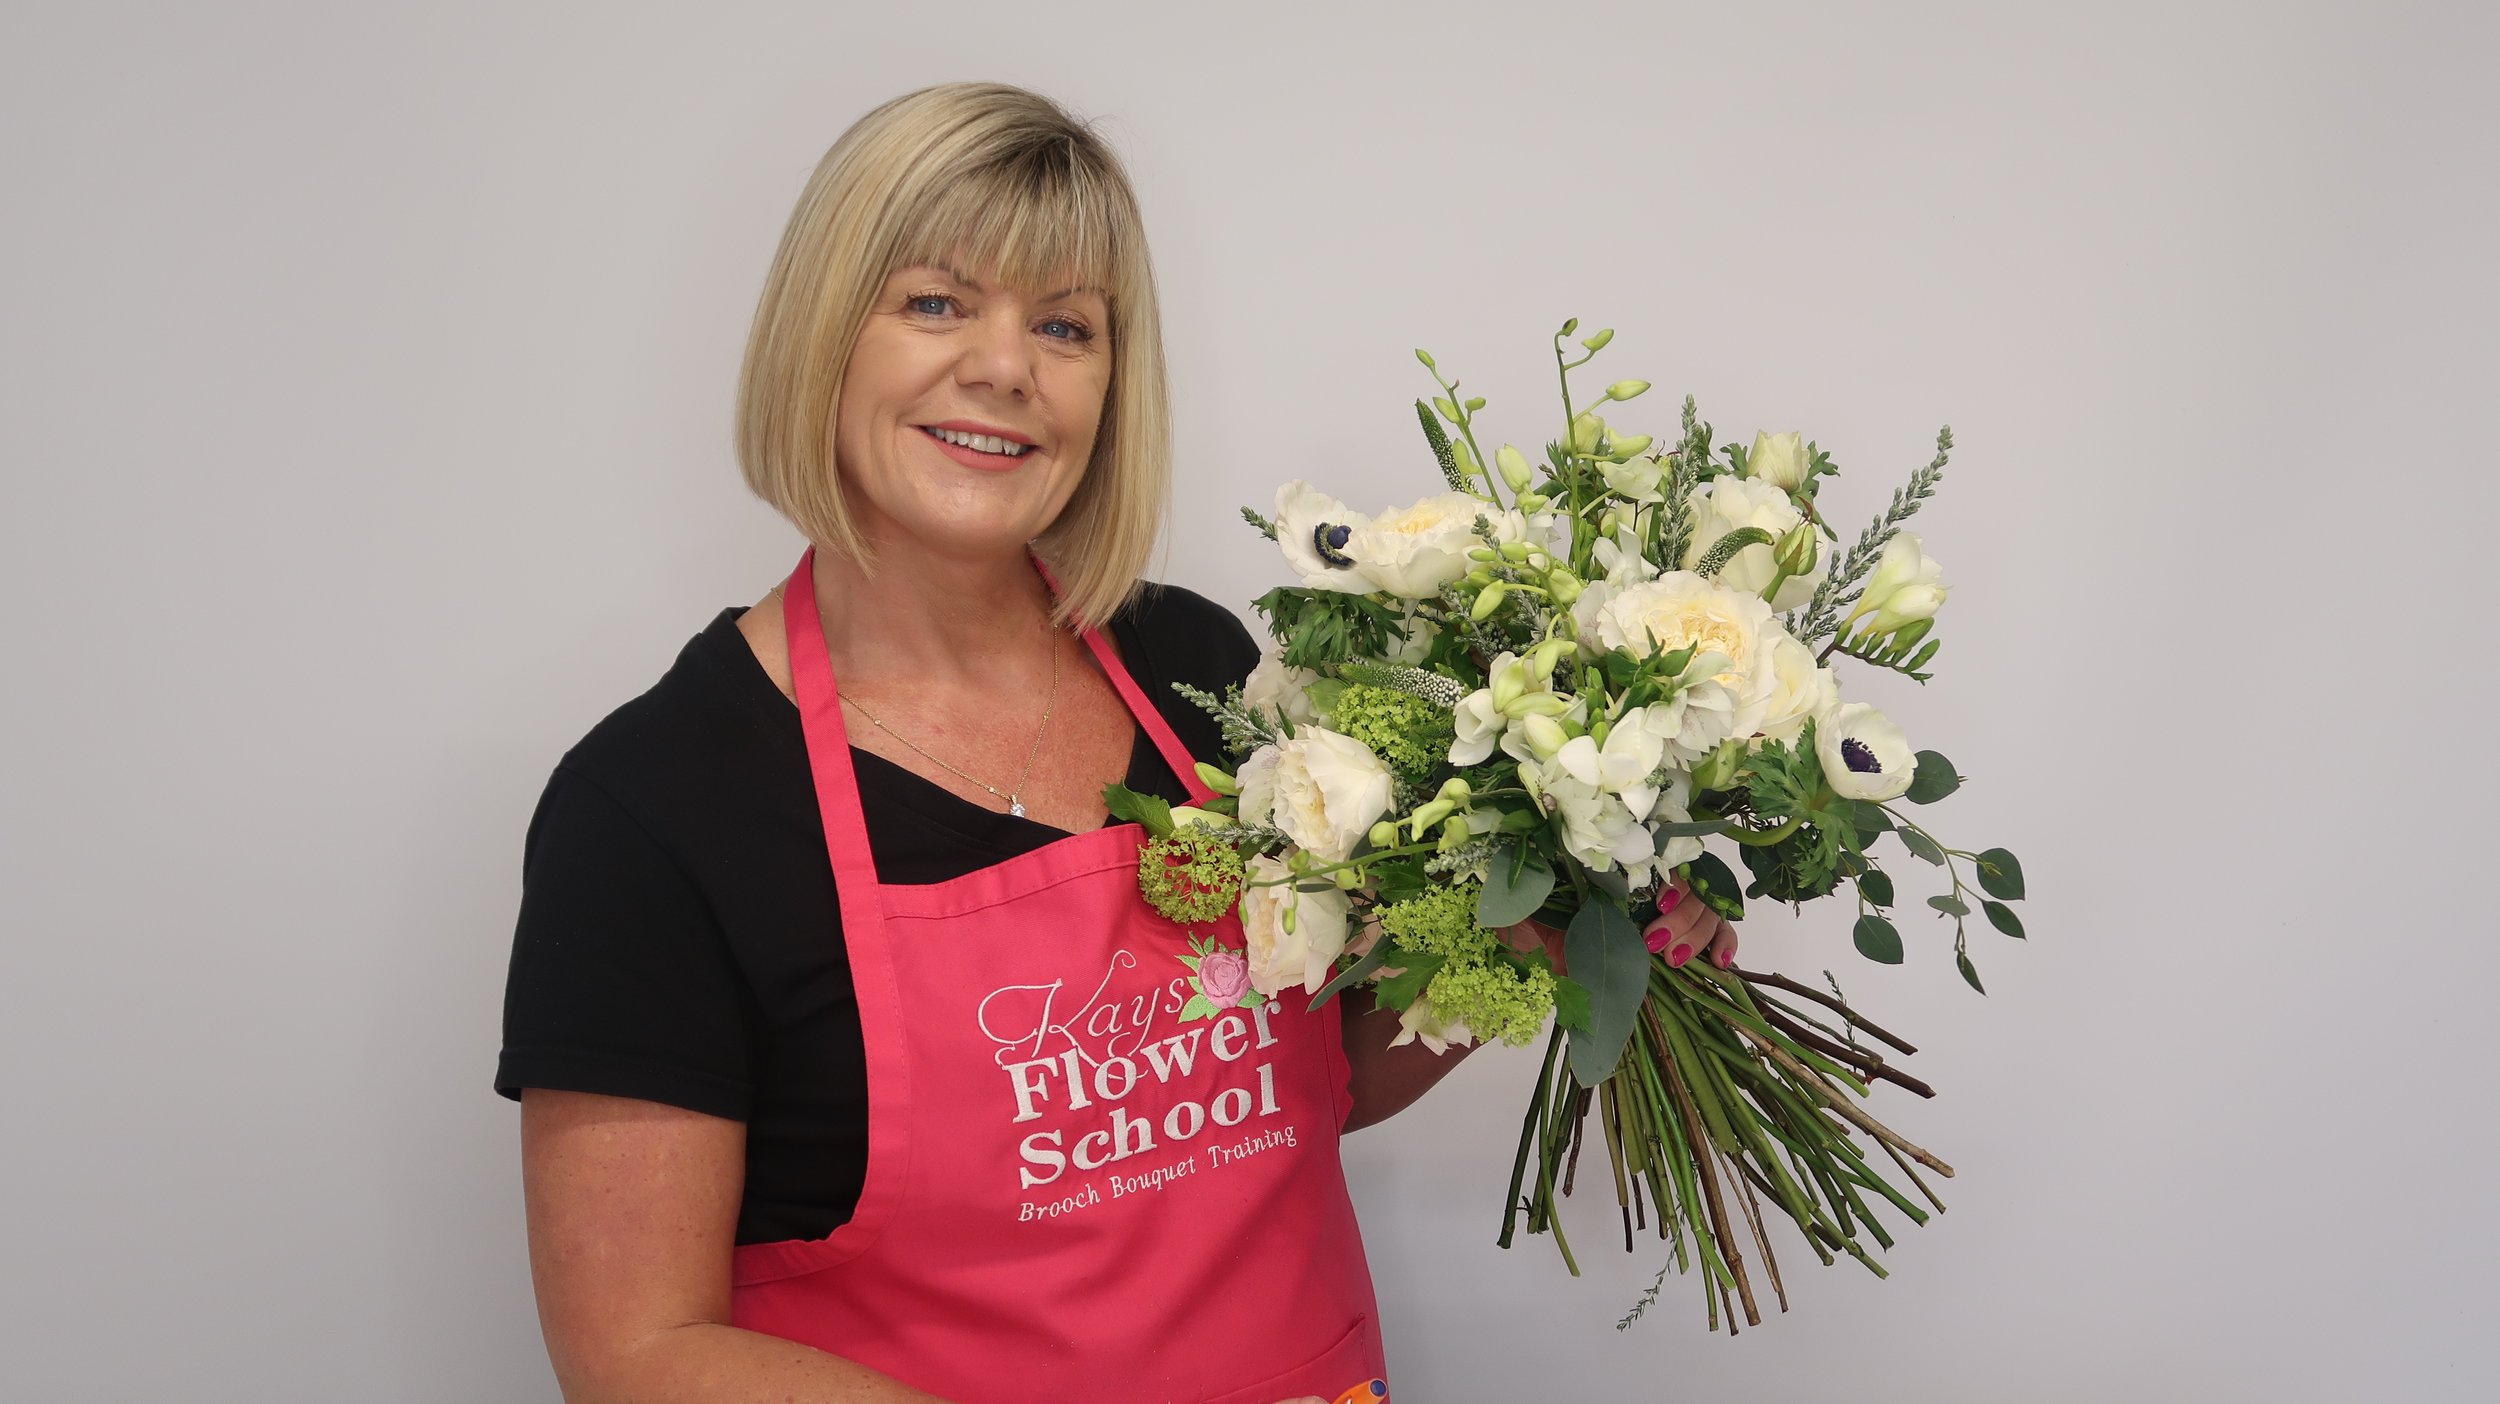 How to become a florist. — Kay's Flower School